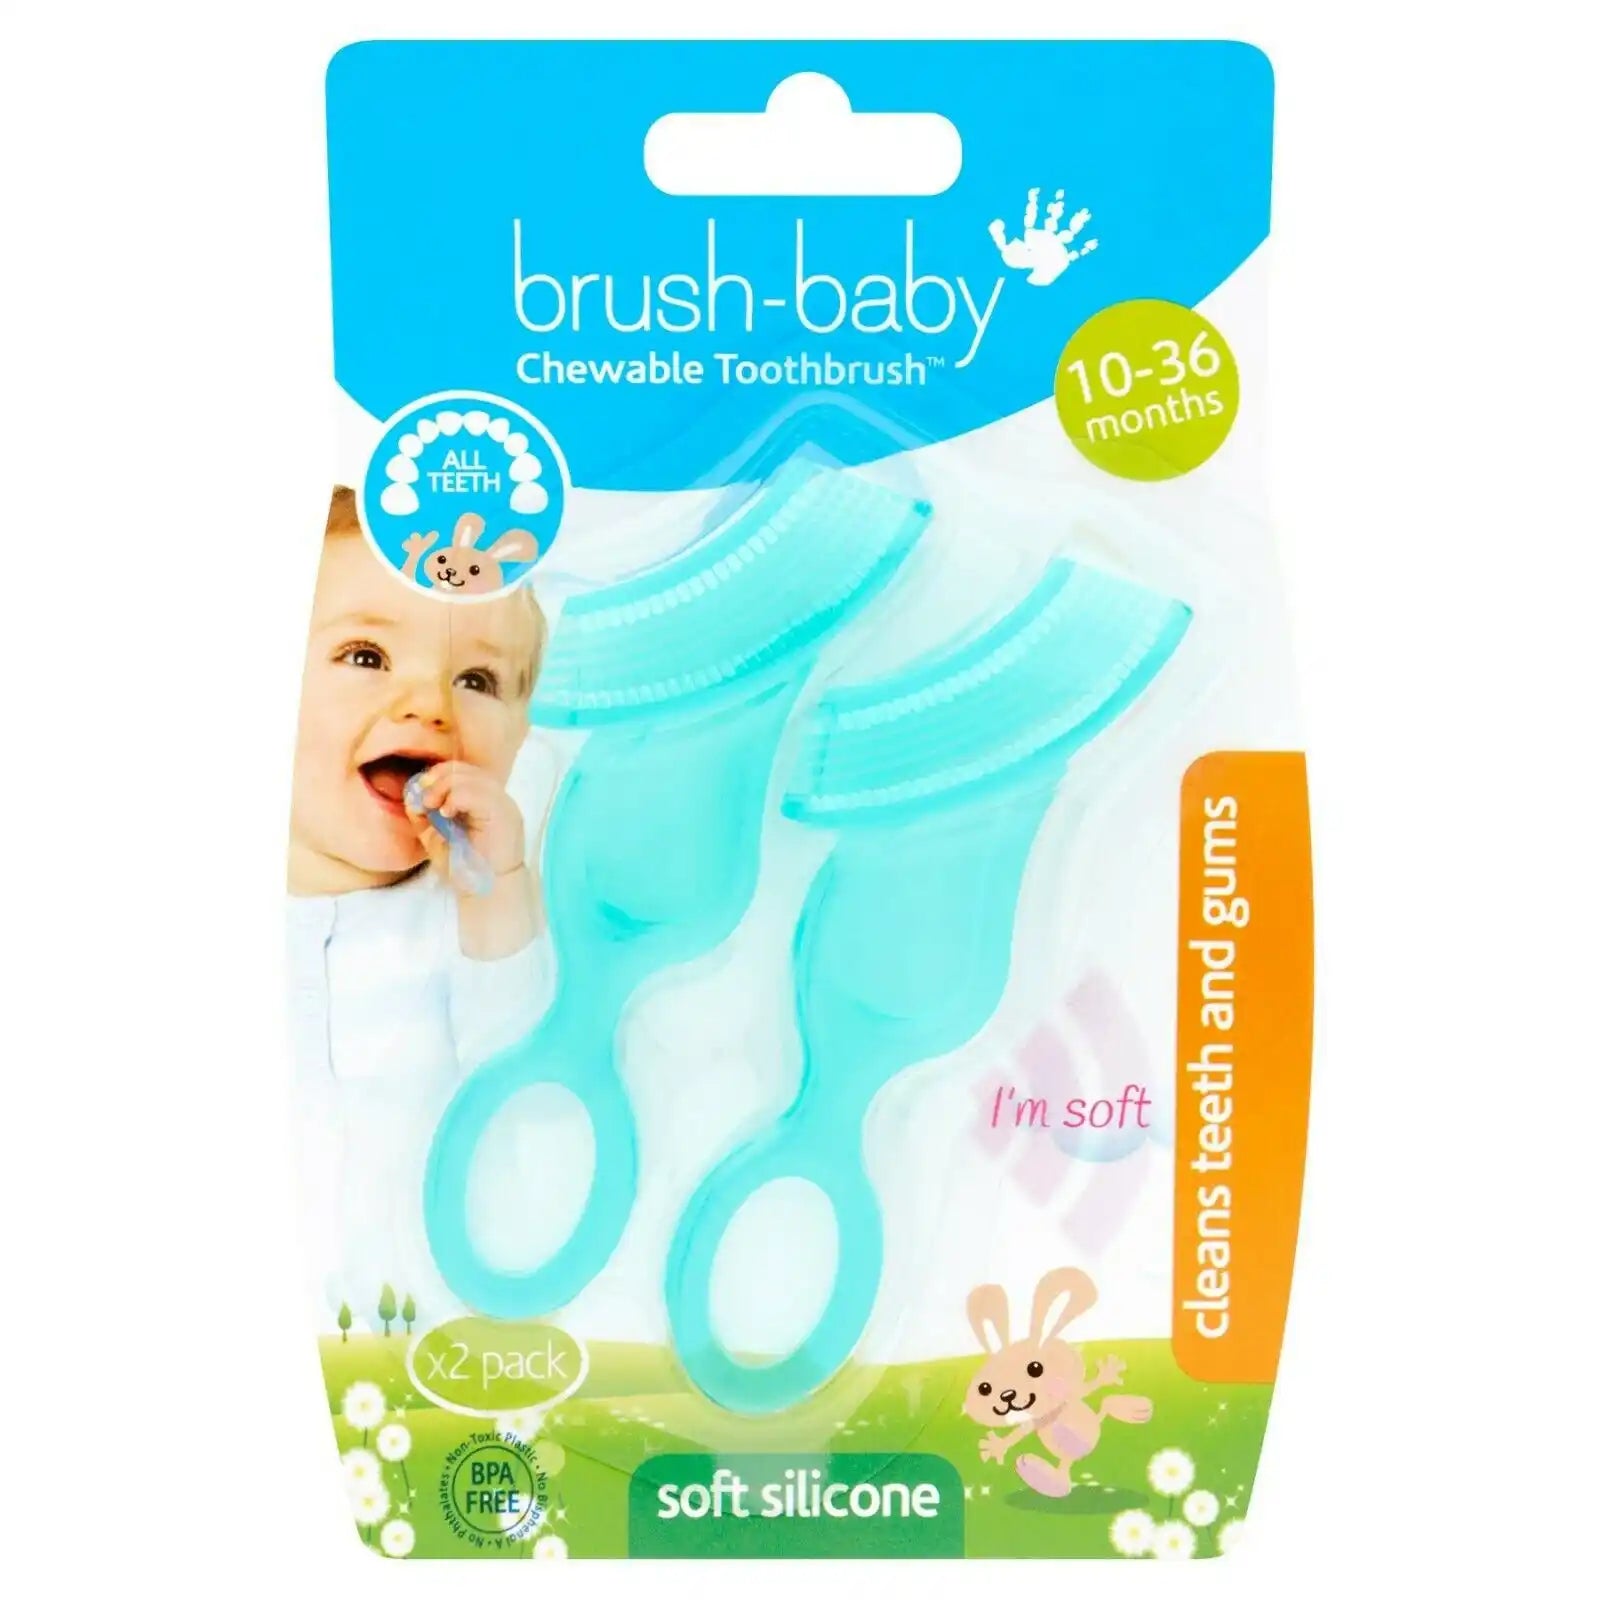 Brush-Baby New Chewable Toothbrush (Double Pack)